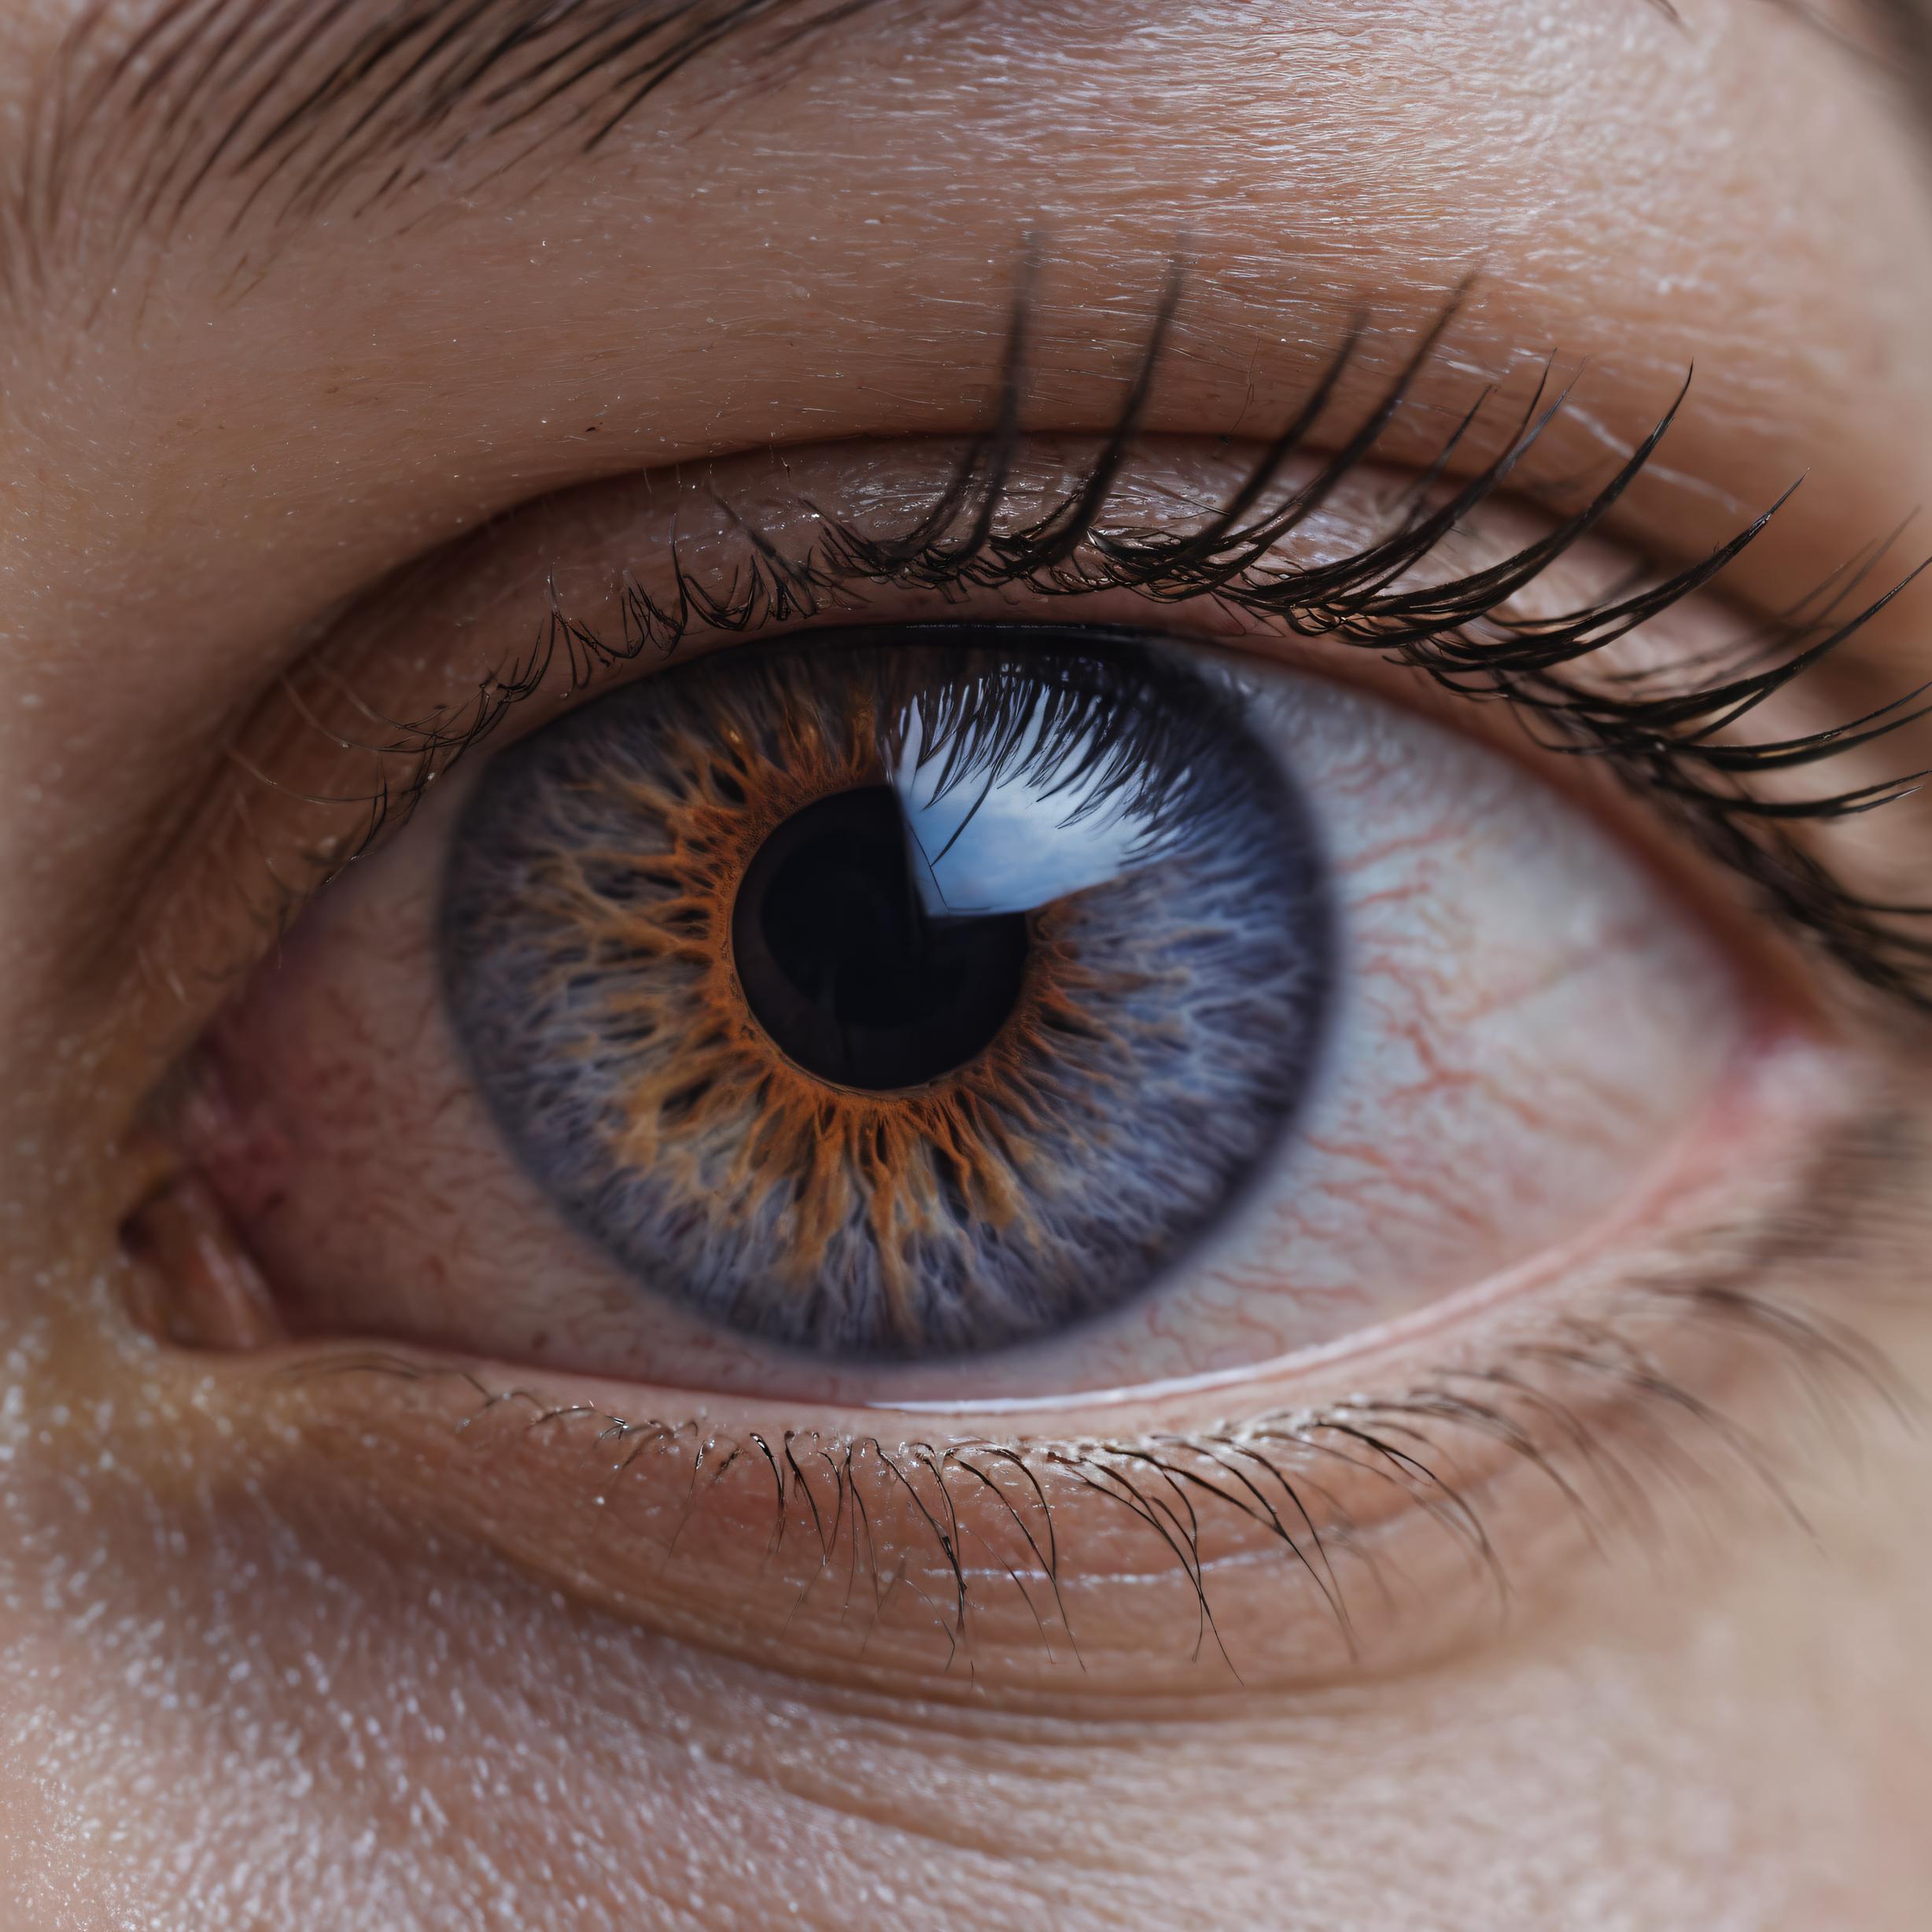 A close-up of a person's eye with a blue and orange iris.